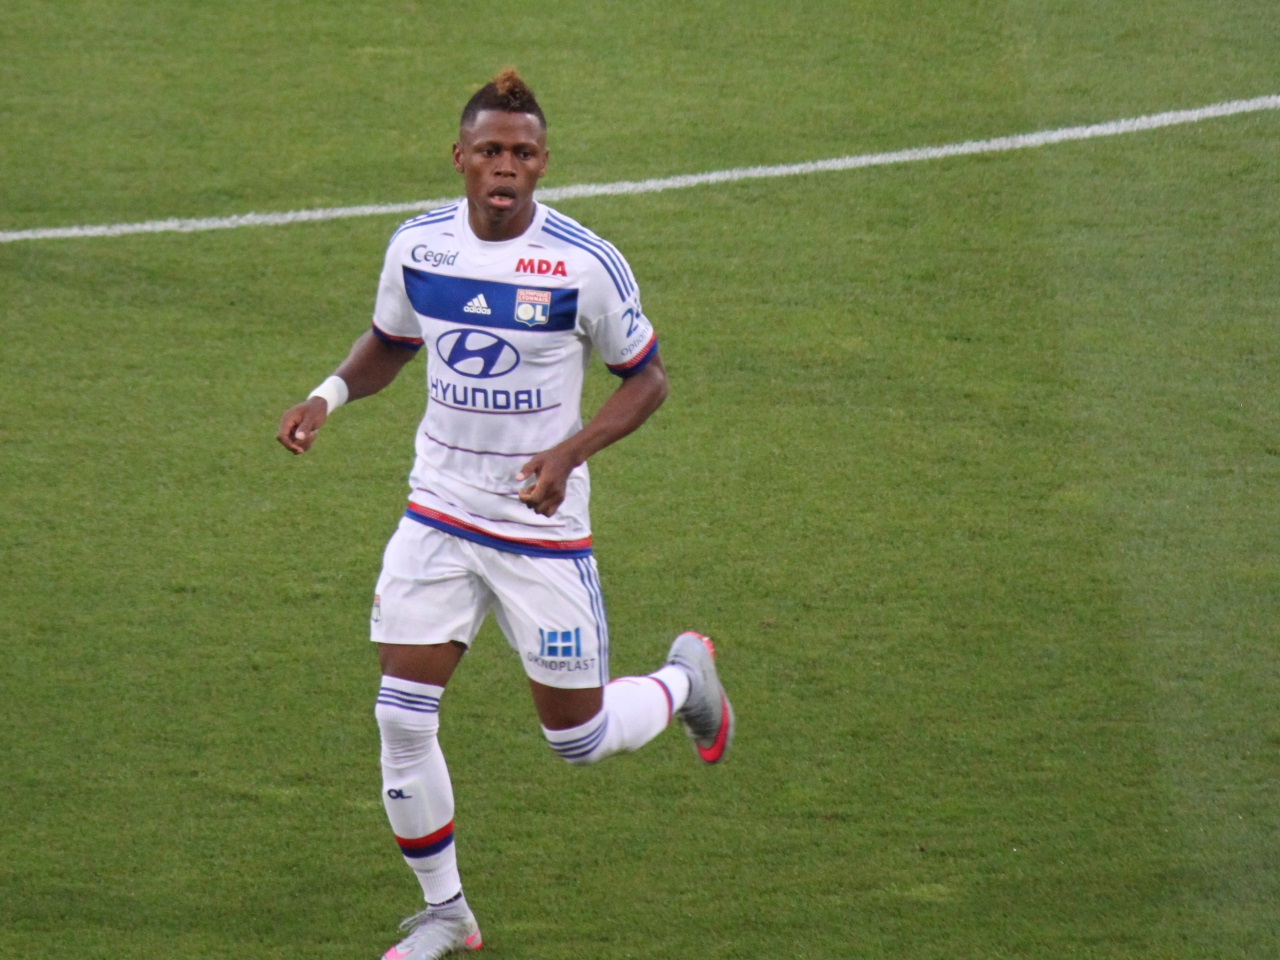 Maillot Domicile OM Clinton NJIE